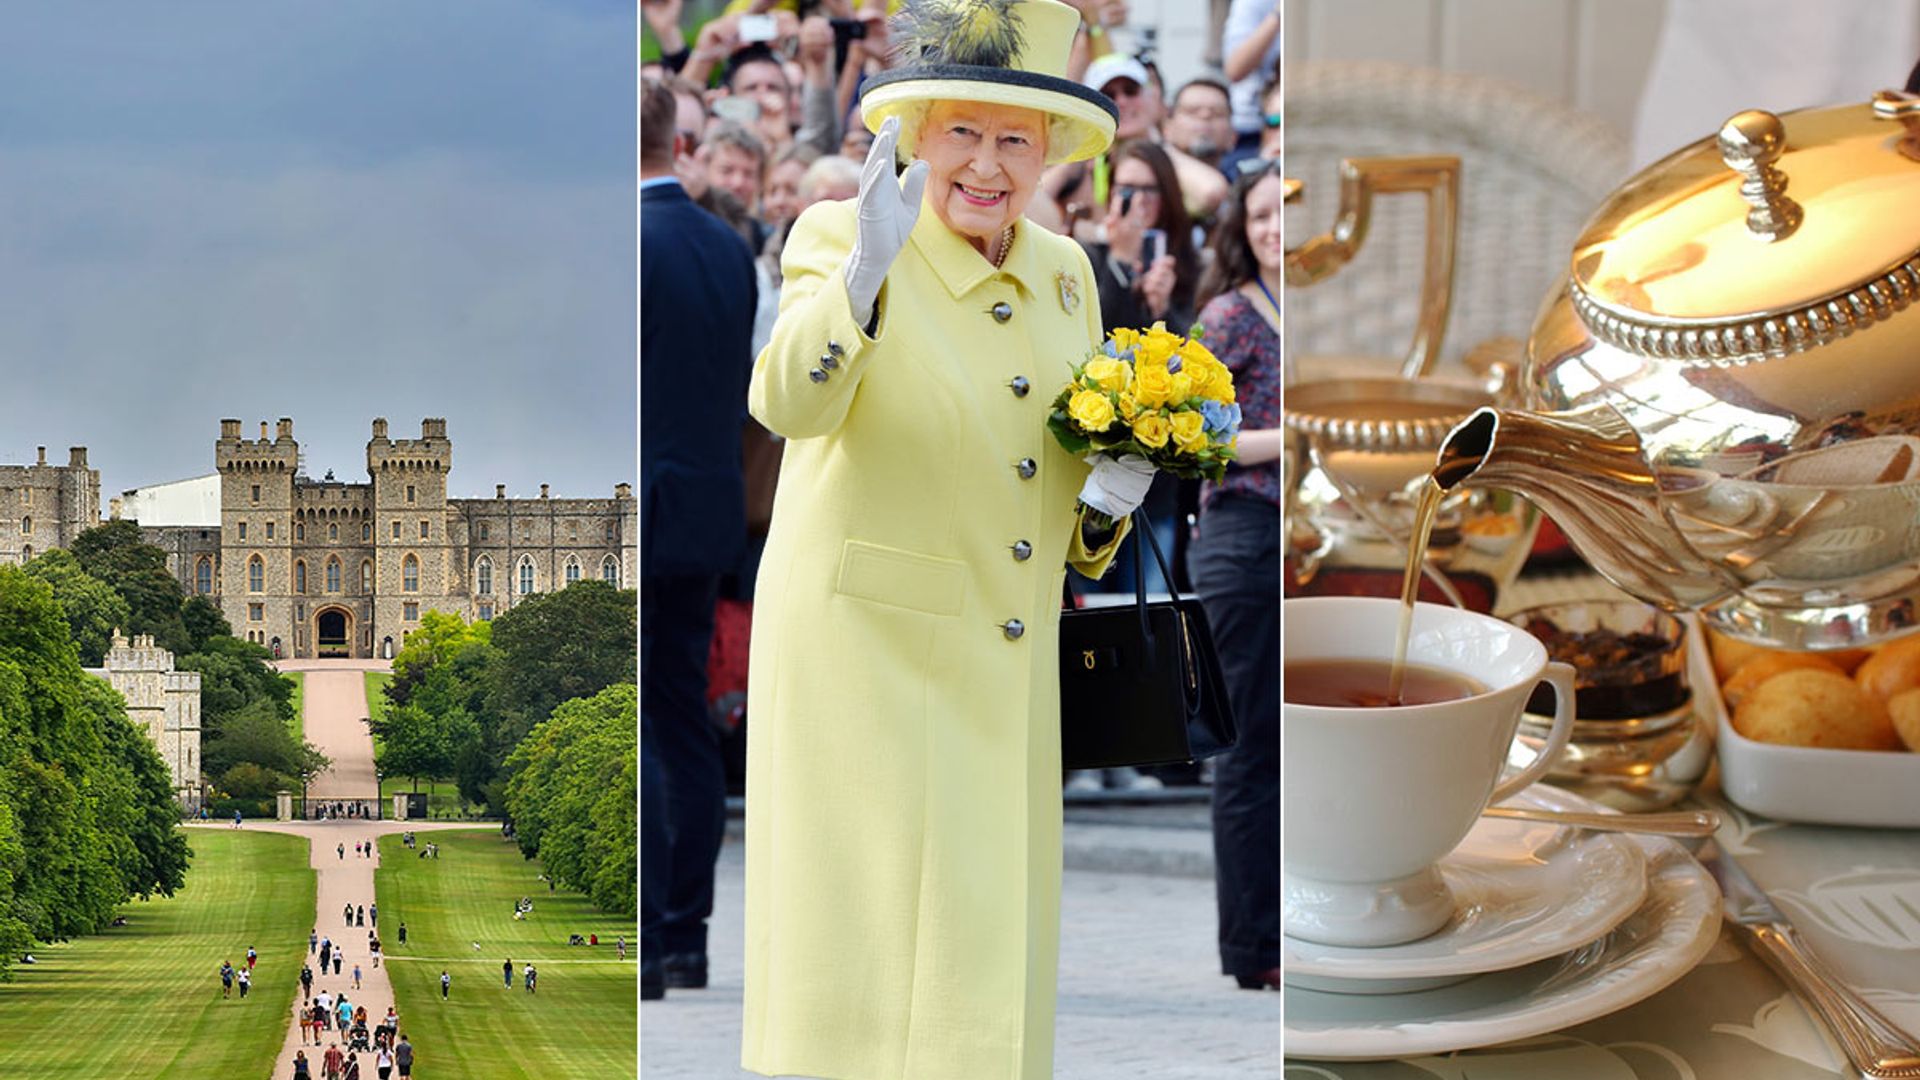 11 royal experience days to celebrate the Queen's Platinum Jubilee